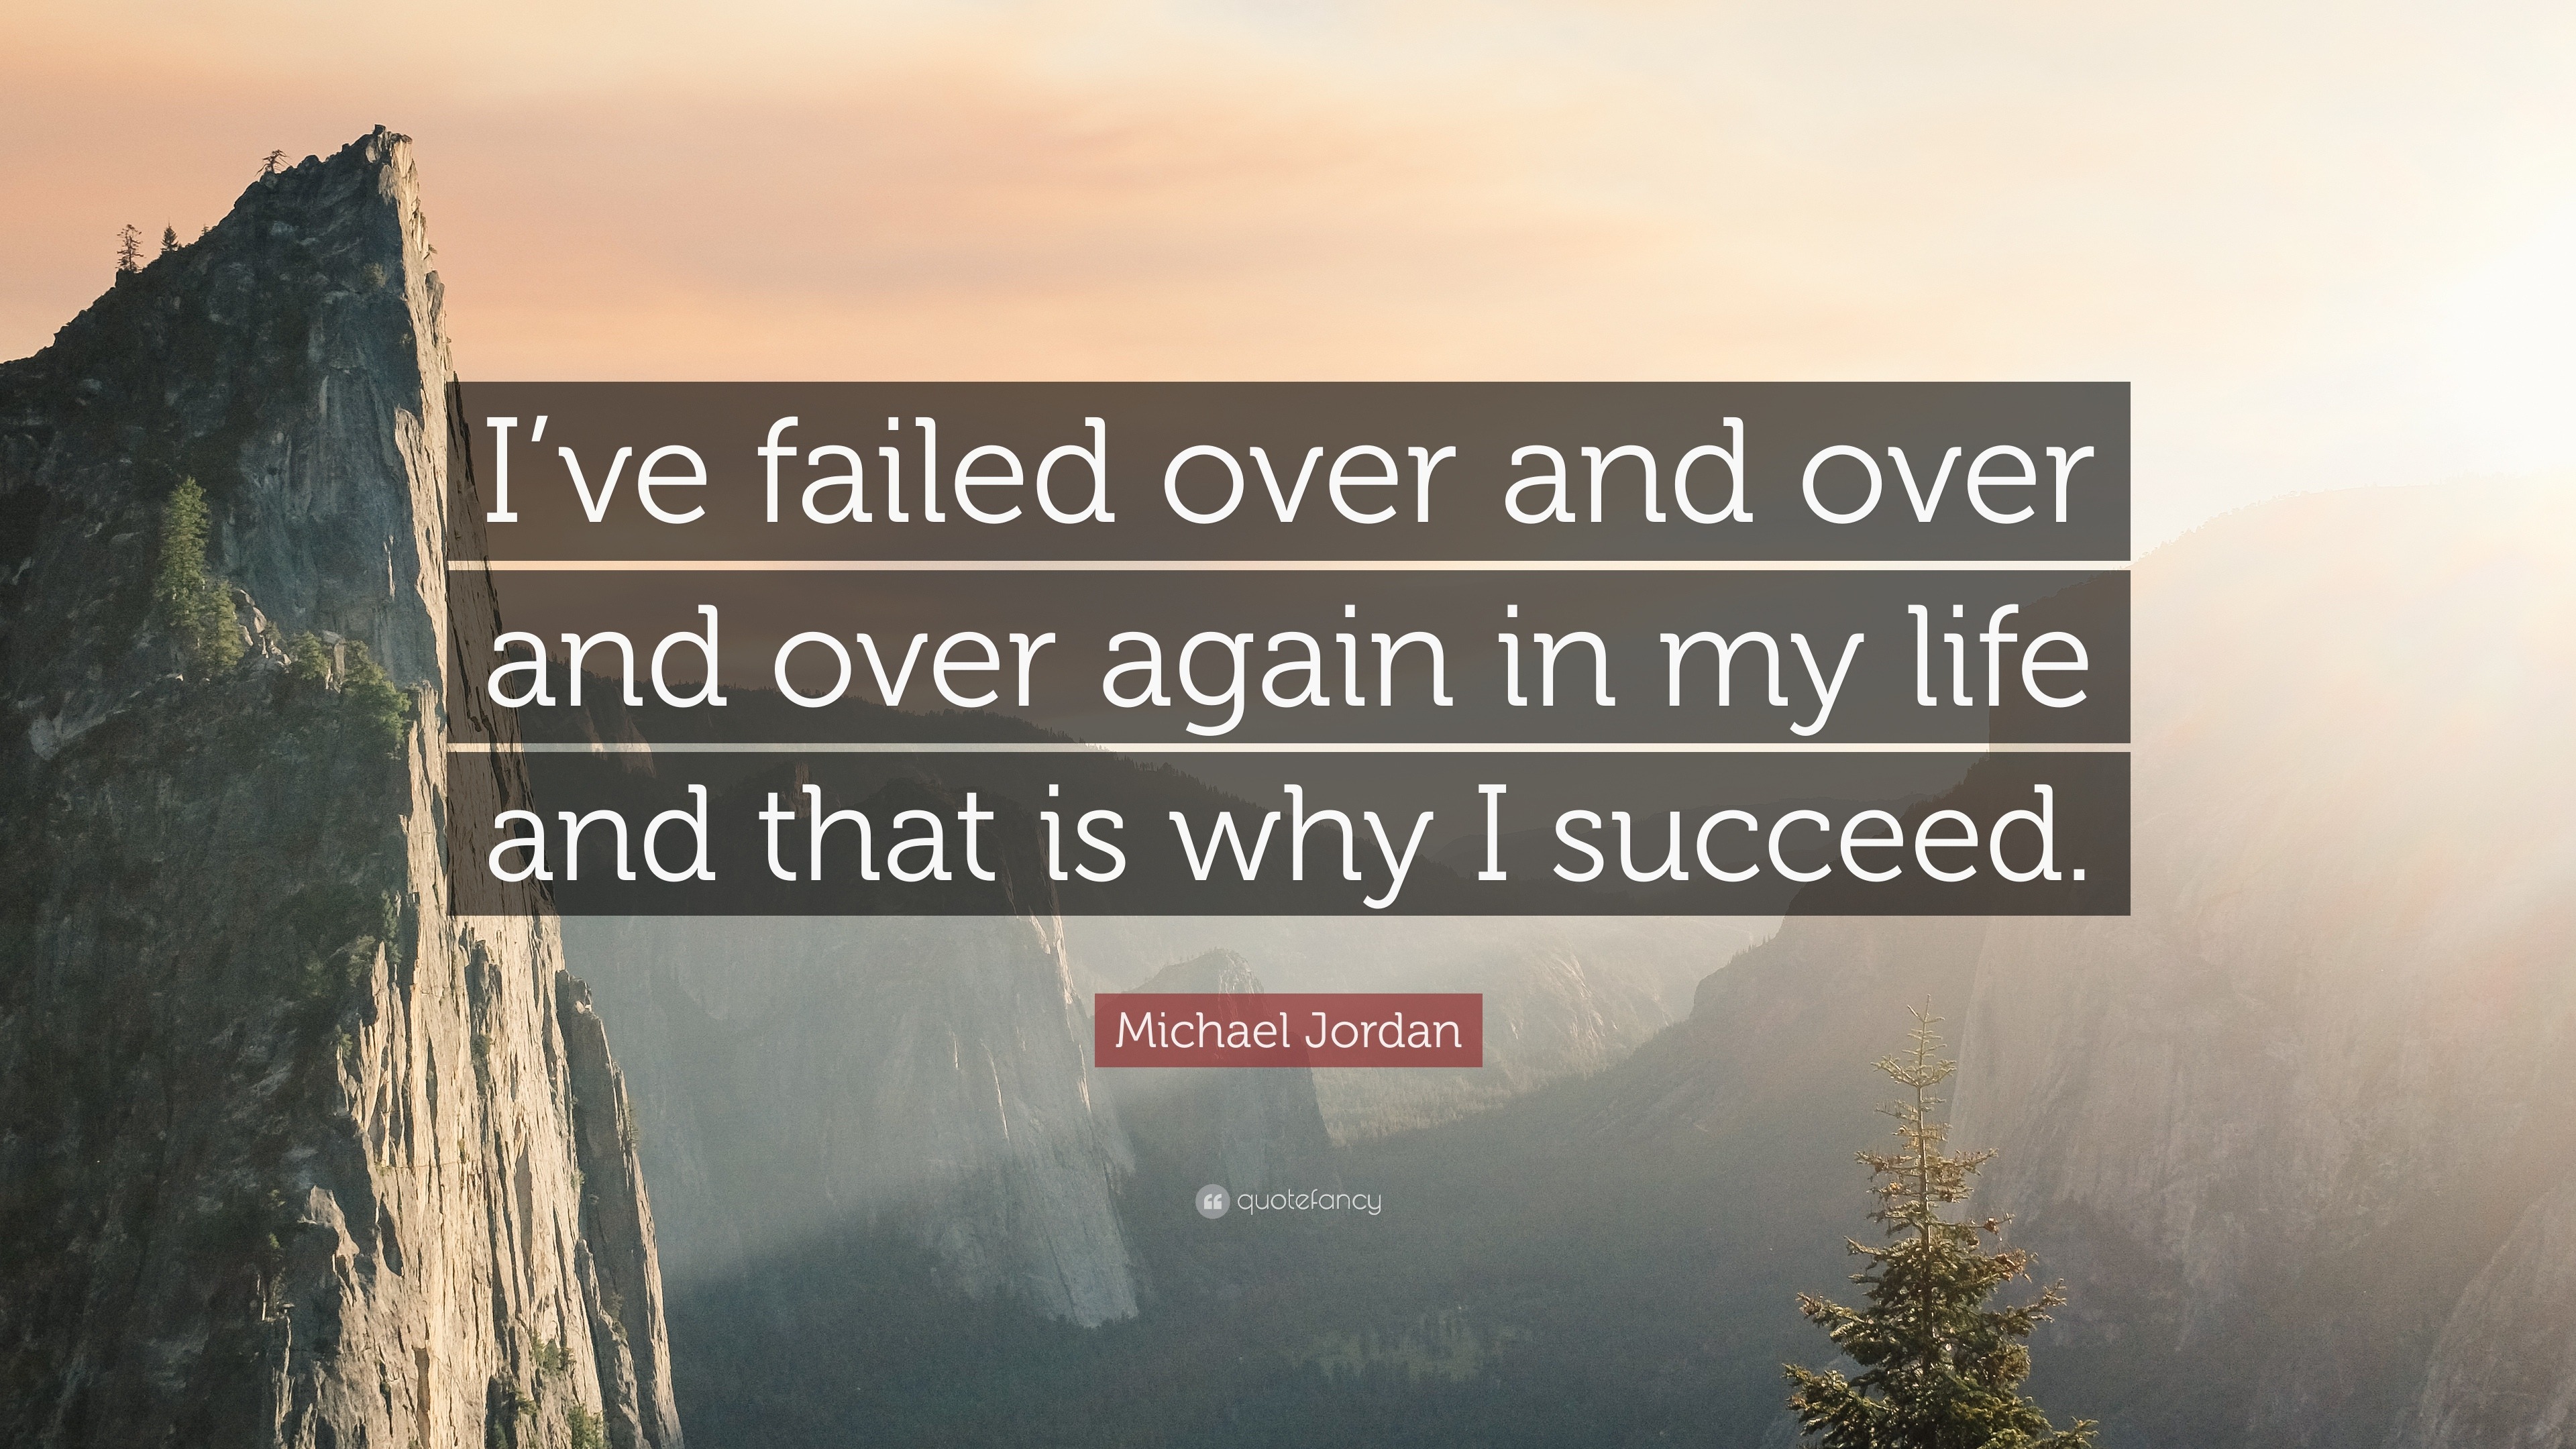 Michael Jordan Quote: “I’ve failed over and over and over again in my